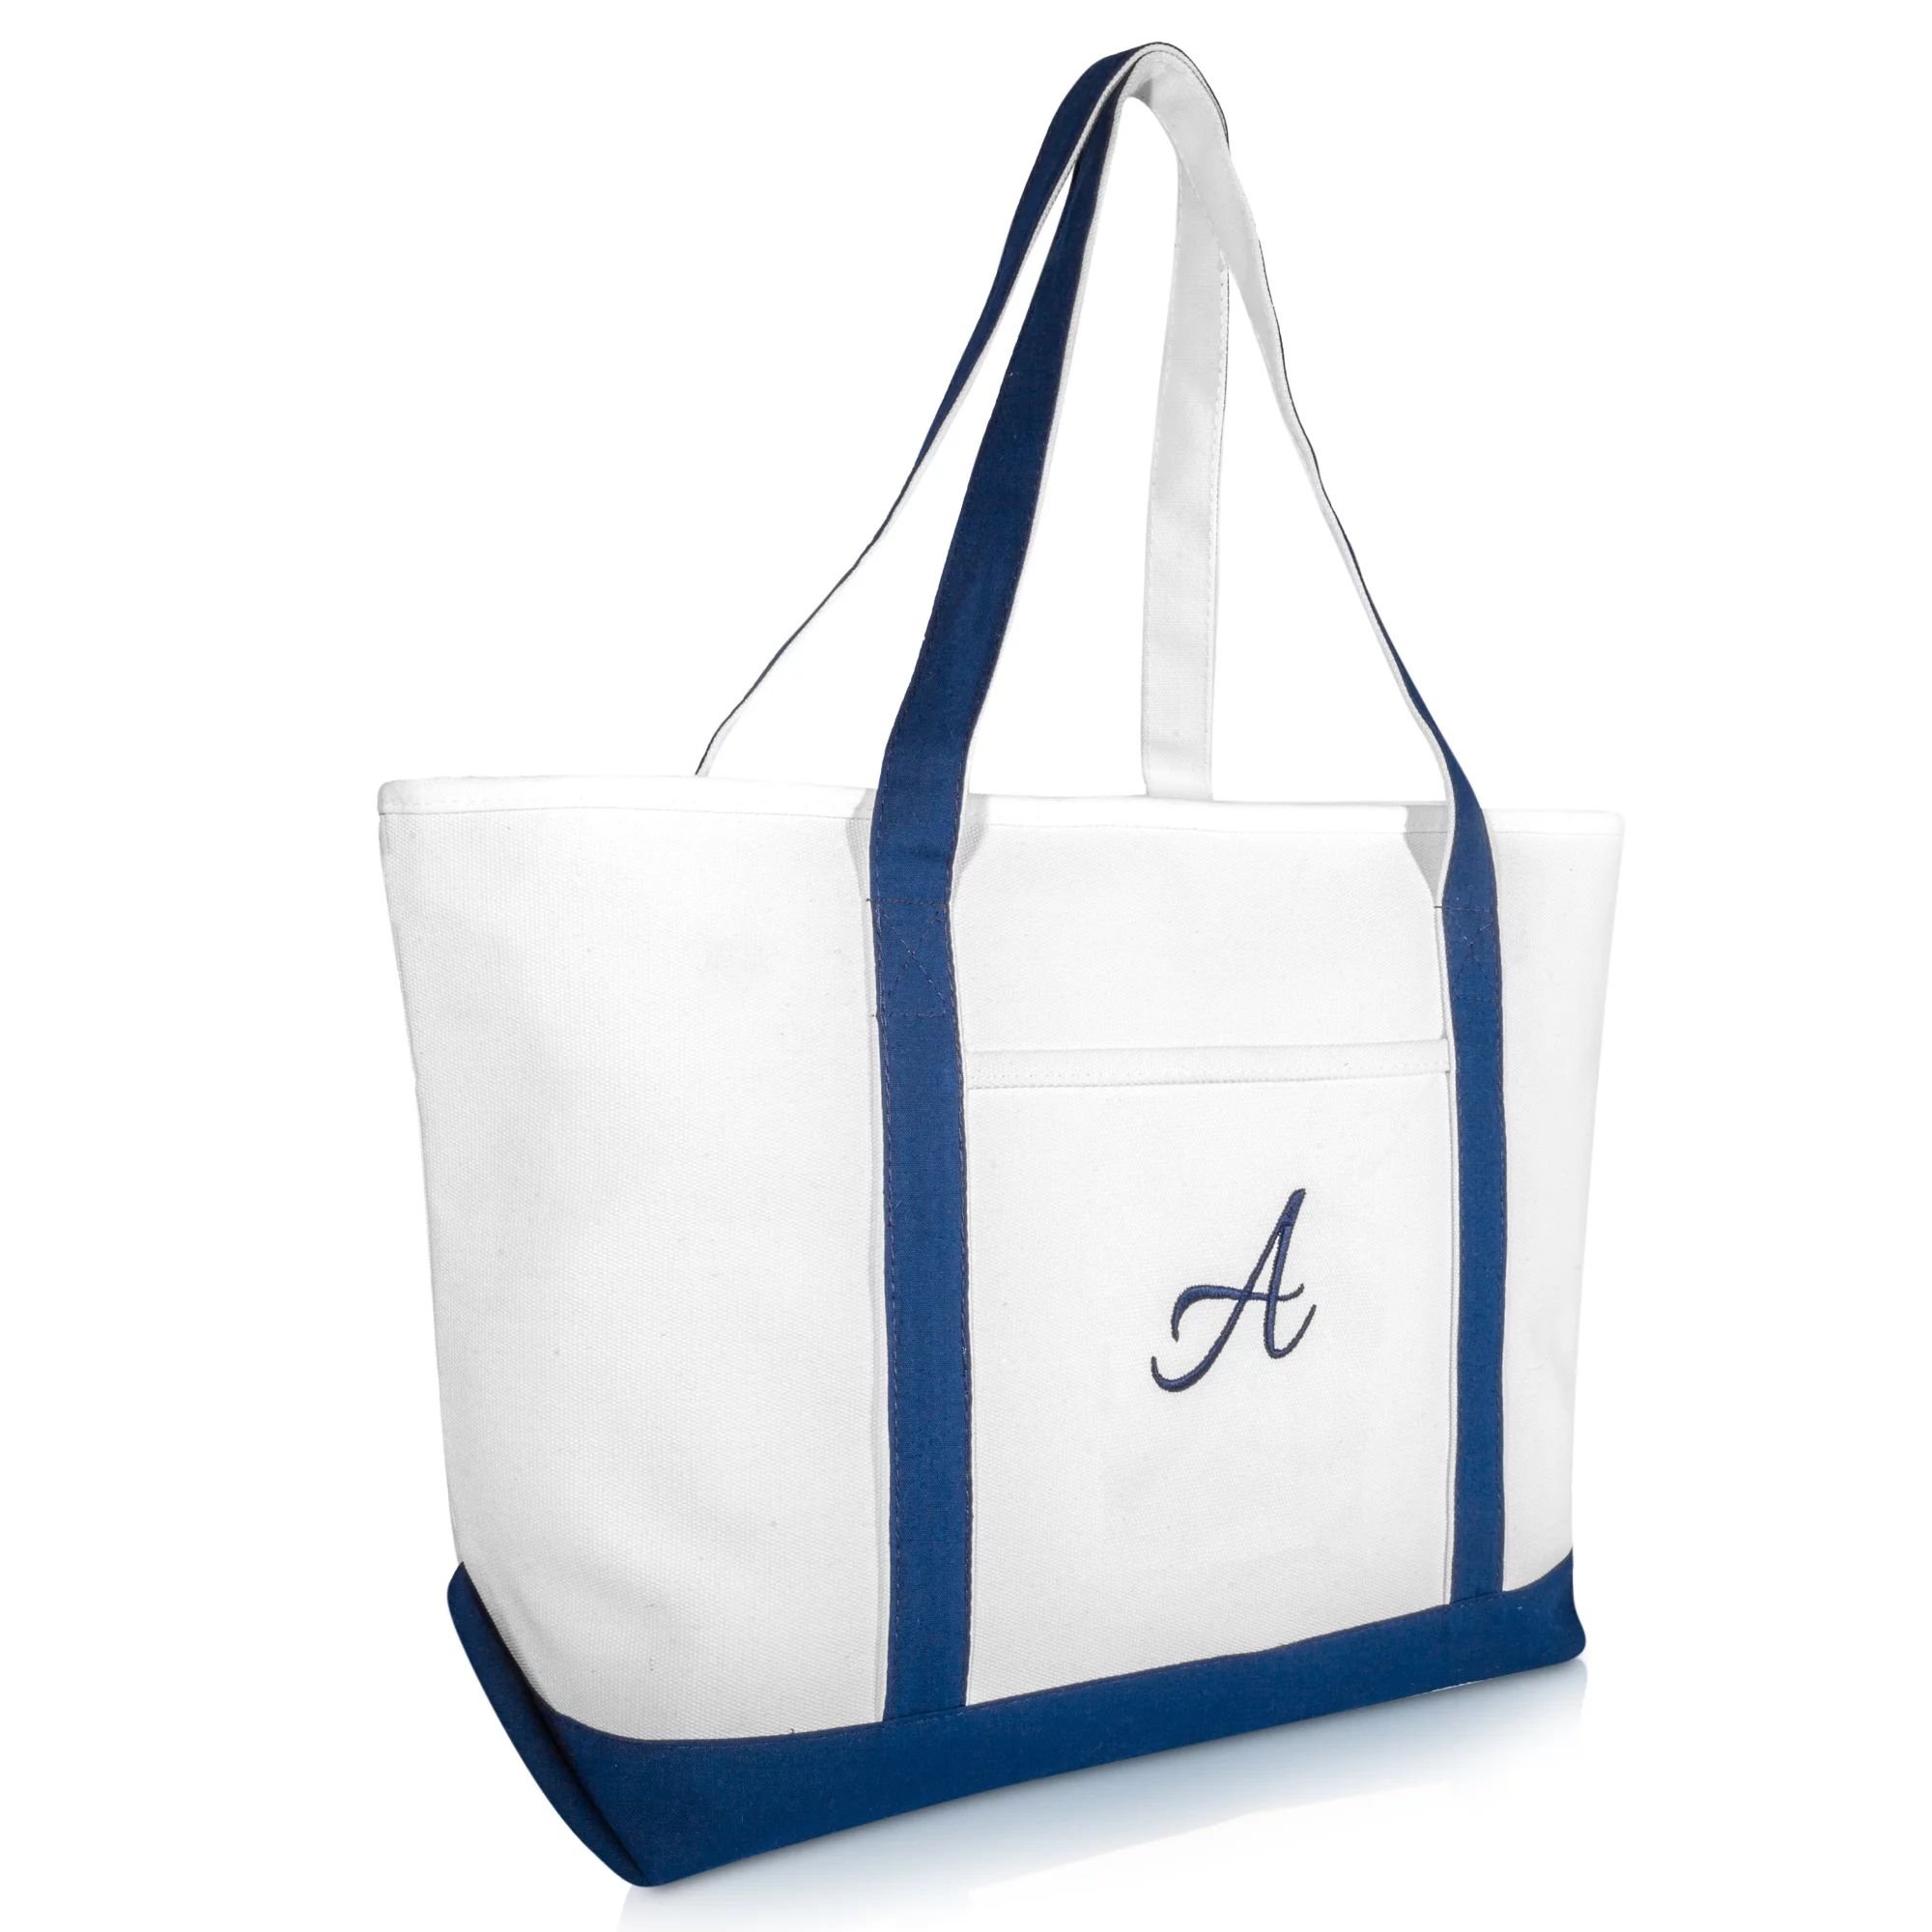 DALIX Quality Canvas Tote Bags Large Beach Bags Navy Blue Monogrammed A | Walmart (US)